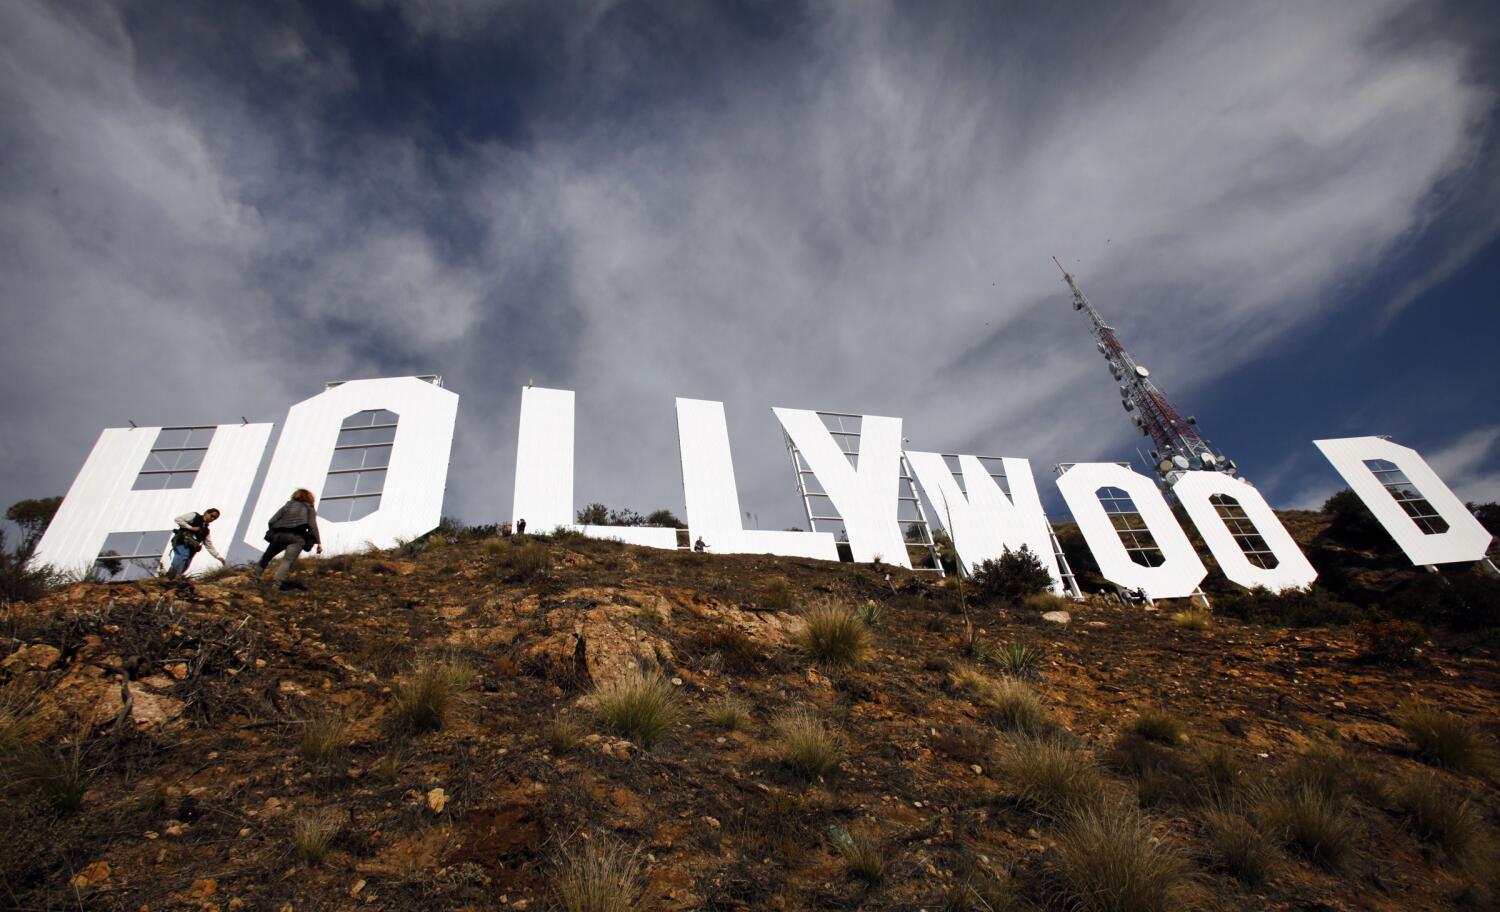 Los Angeles loses ground to rivals in film and TV employment but remains the biggest player